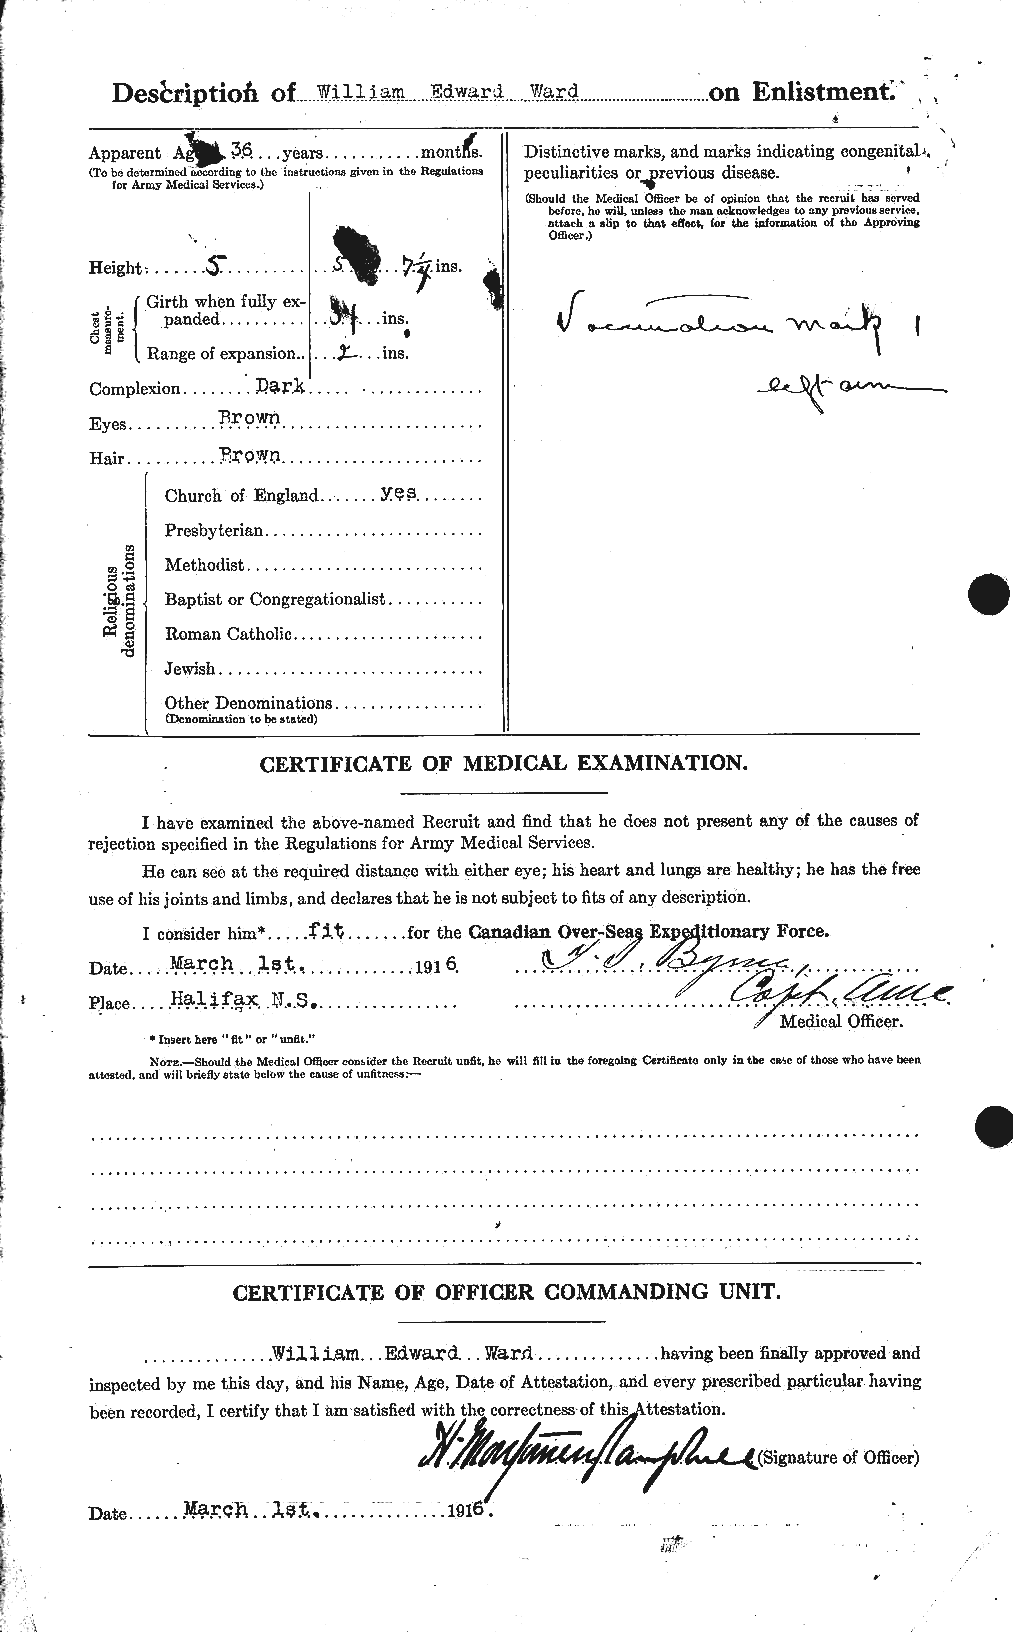 Personnel Records of the First World War - CEF 659811b